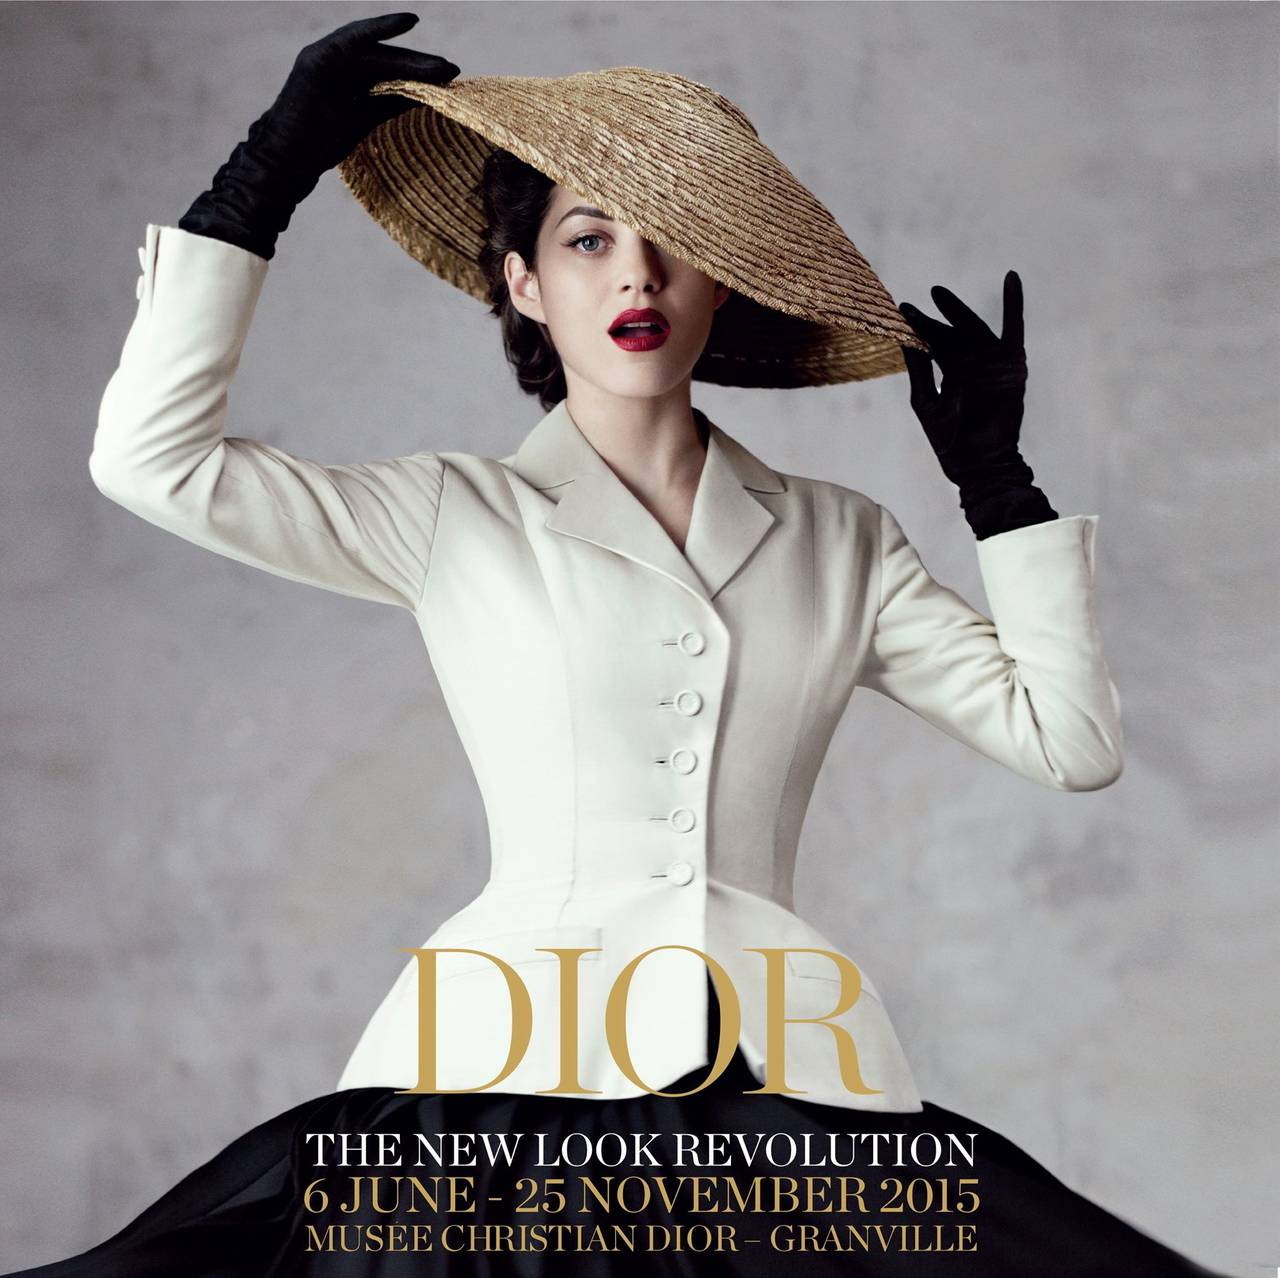 Christian Dior: The New Look